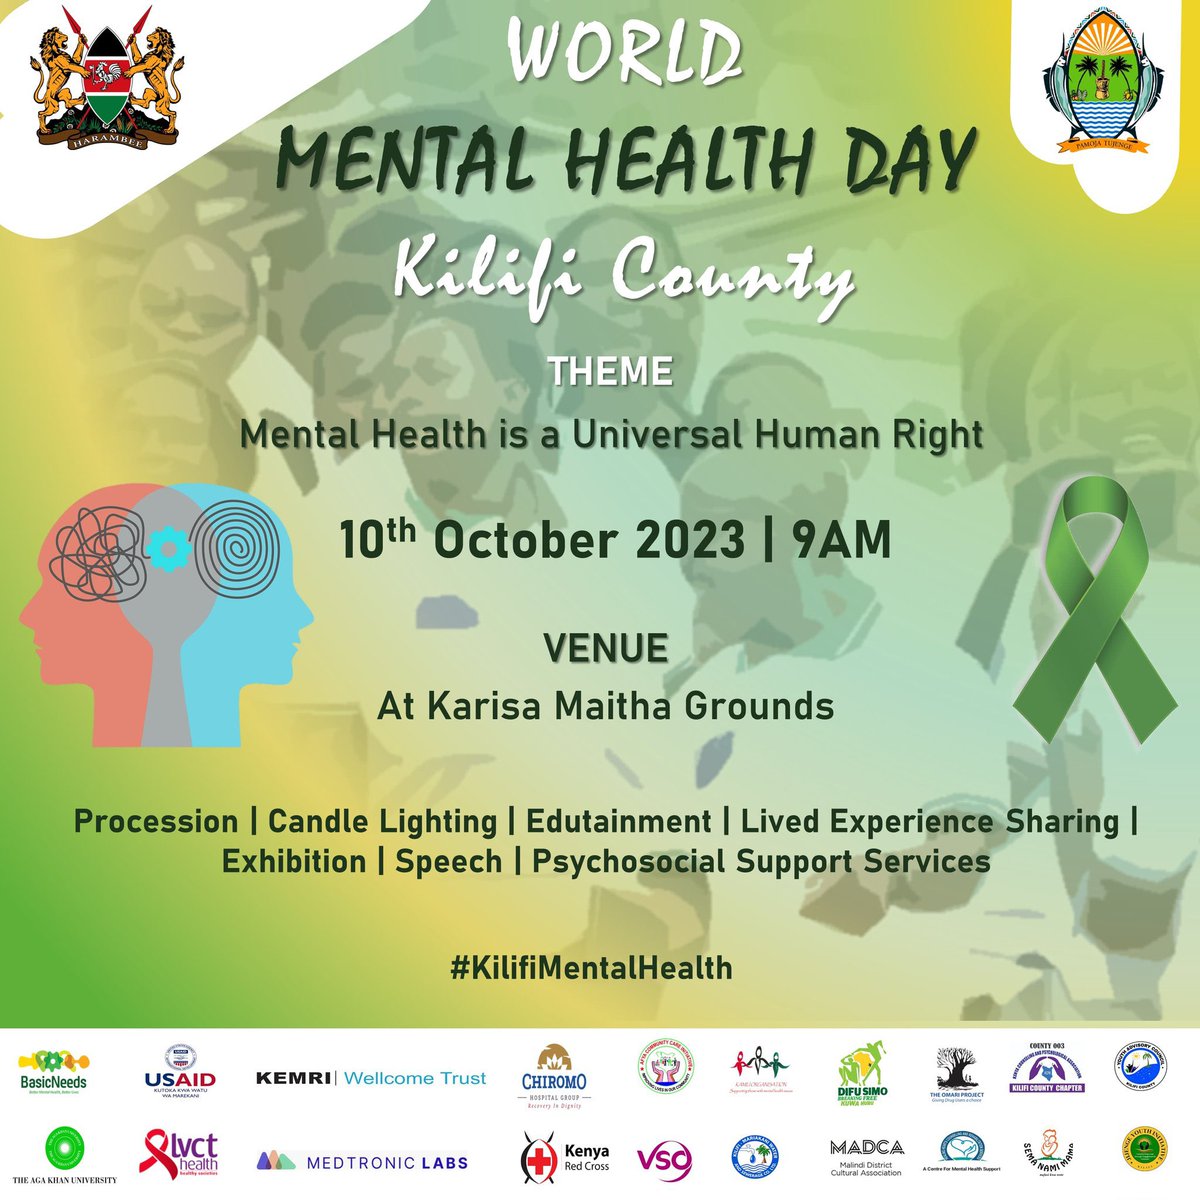 We, as a department, acknowledge the importance of Mental Health Day by highlighting its equal significance to physical health. We extend our invitation to everyone to come together at Karisa Maitha Grounds on October 10, 2023, as we honor this year's World Mental Health Day